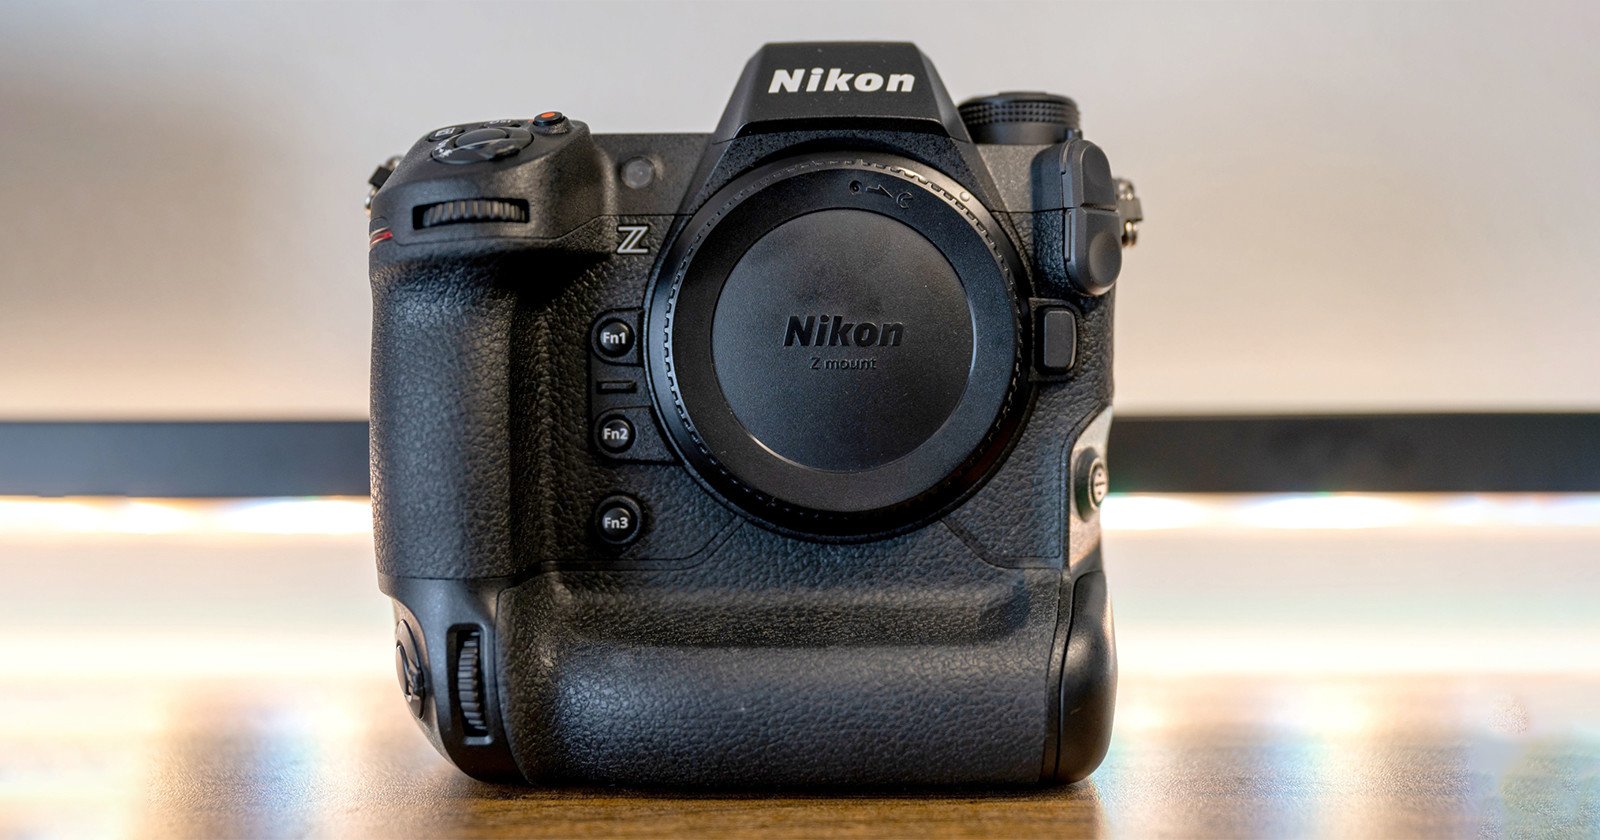 Nikons Z9 Firmware 3.0 Update Adds Nearly 20 New Features